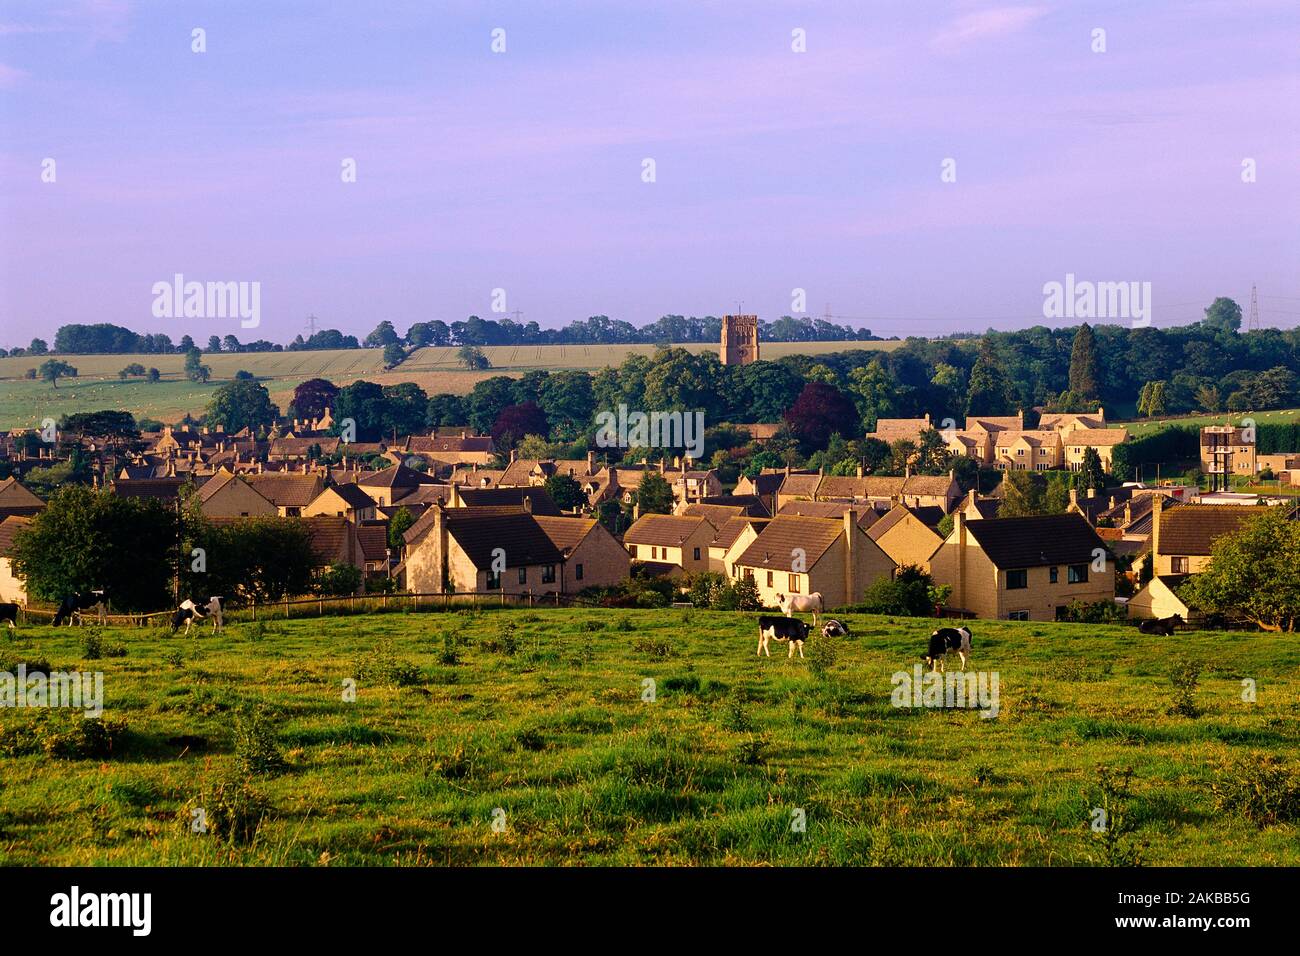 View of countryside scenery with village and cows grazing in pasture, Cotswolds, England, UK Stock Photo